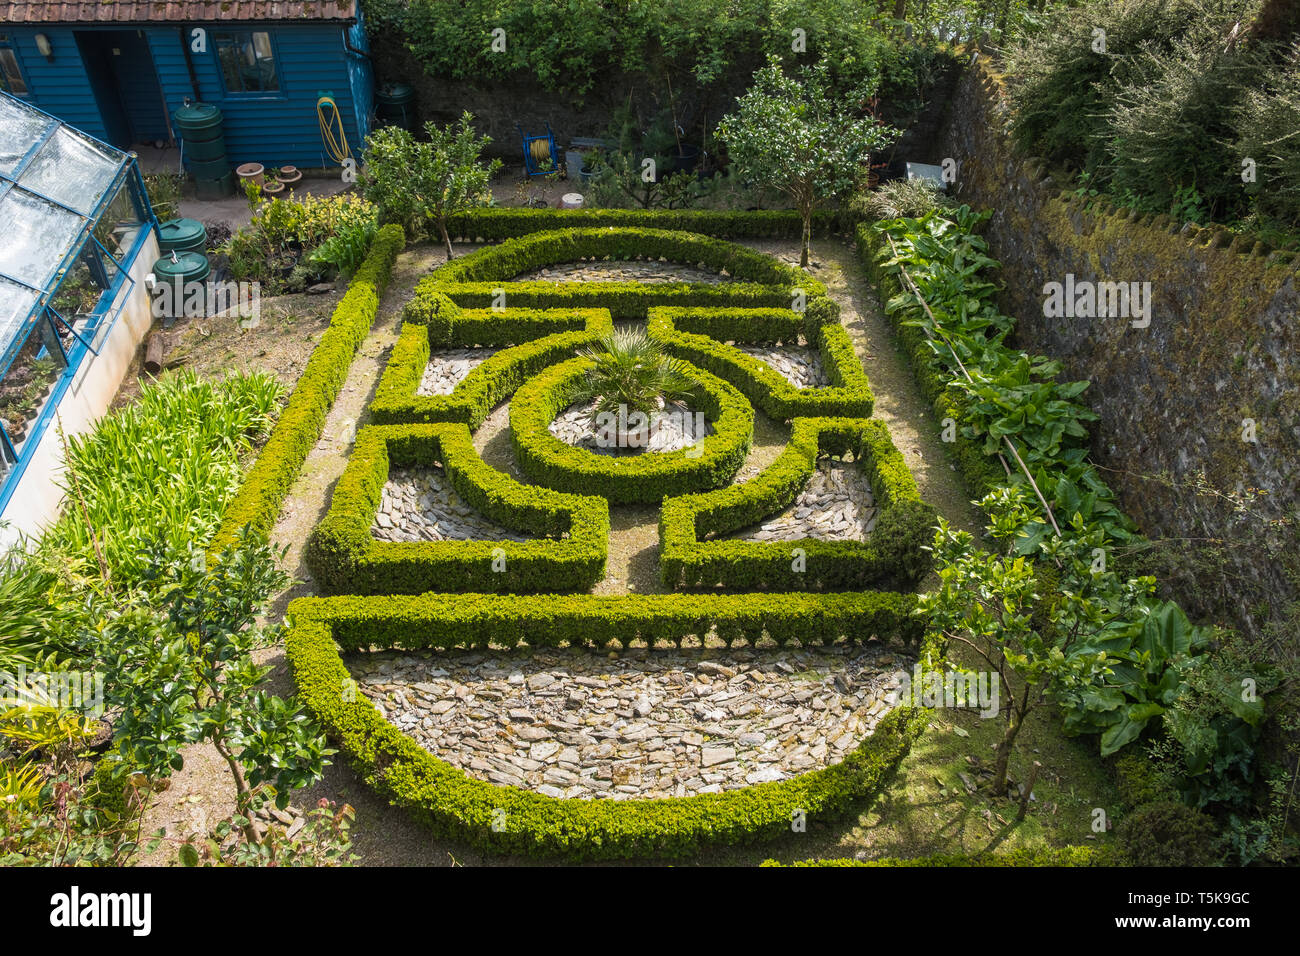 Neat geometric design box hedge viewed from above Stock Photo